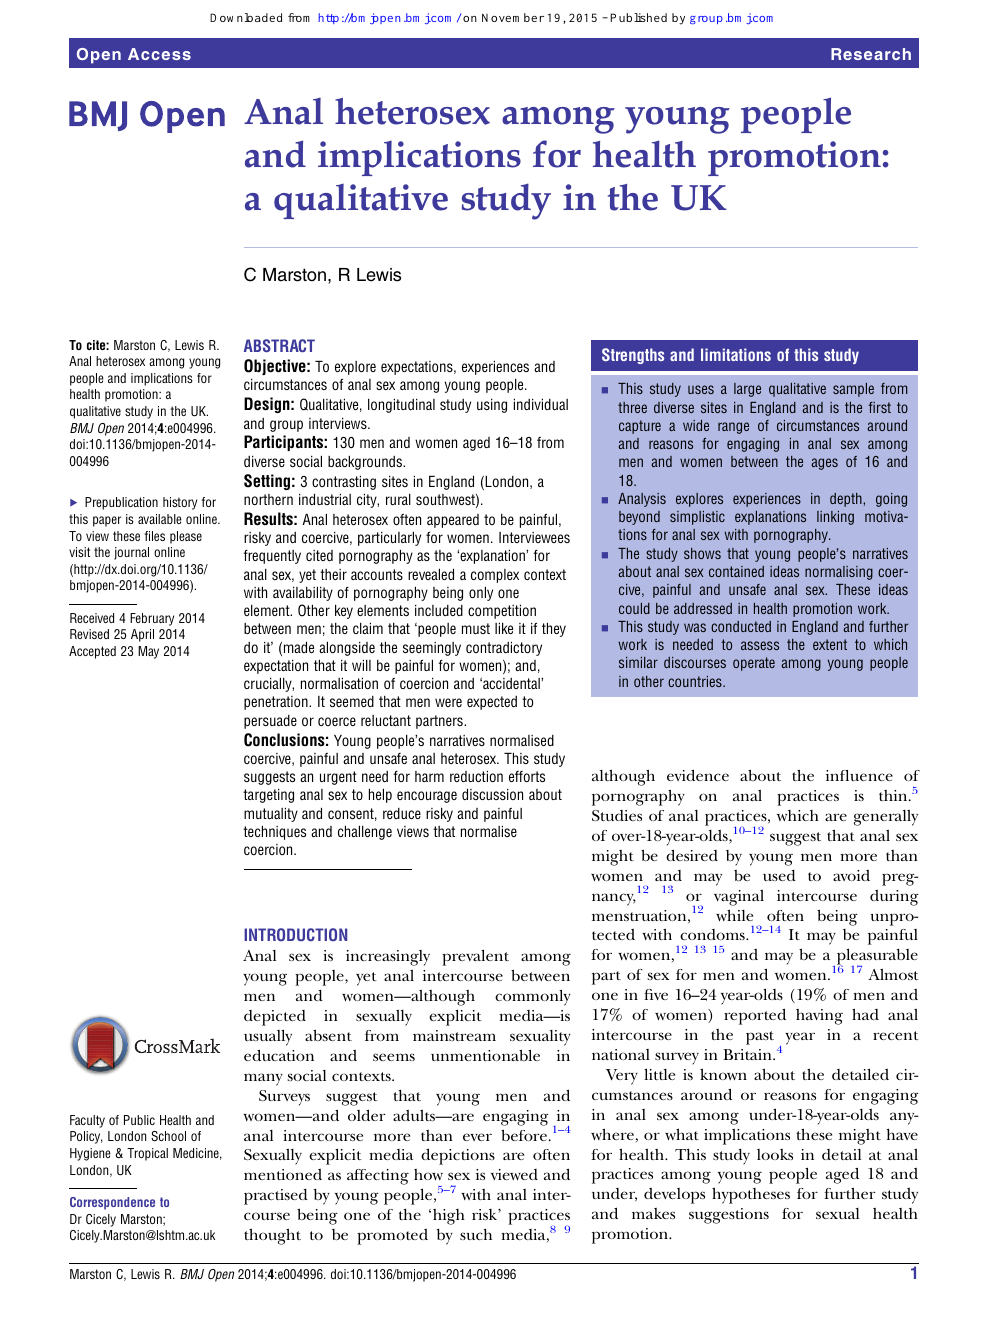 Anal heterosex among young people and implications for health promotion a qualitative study in the UK photo